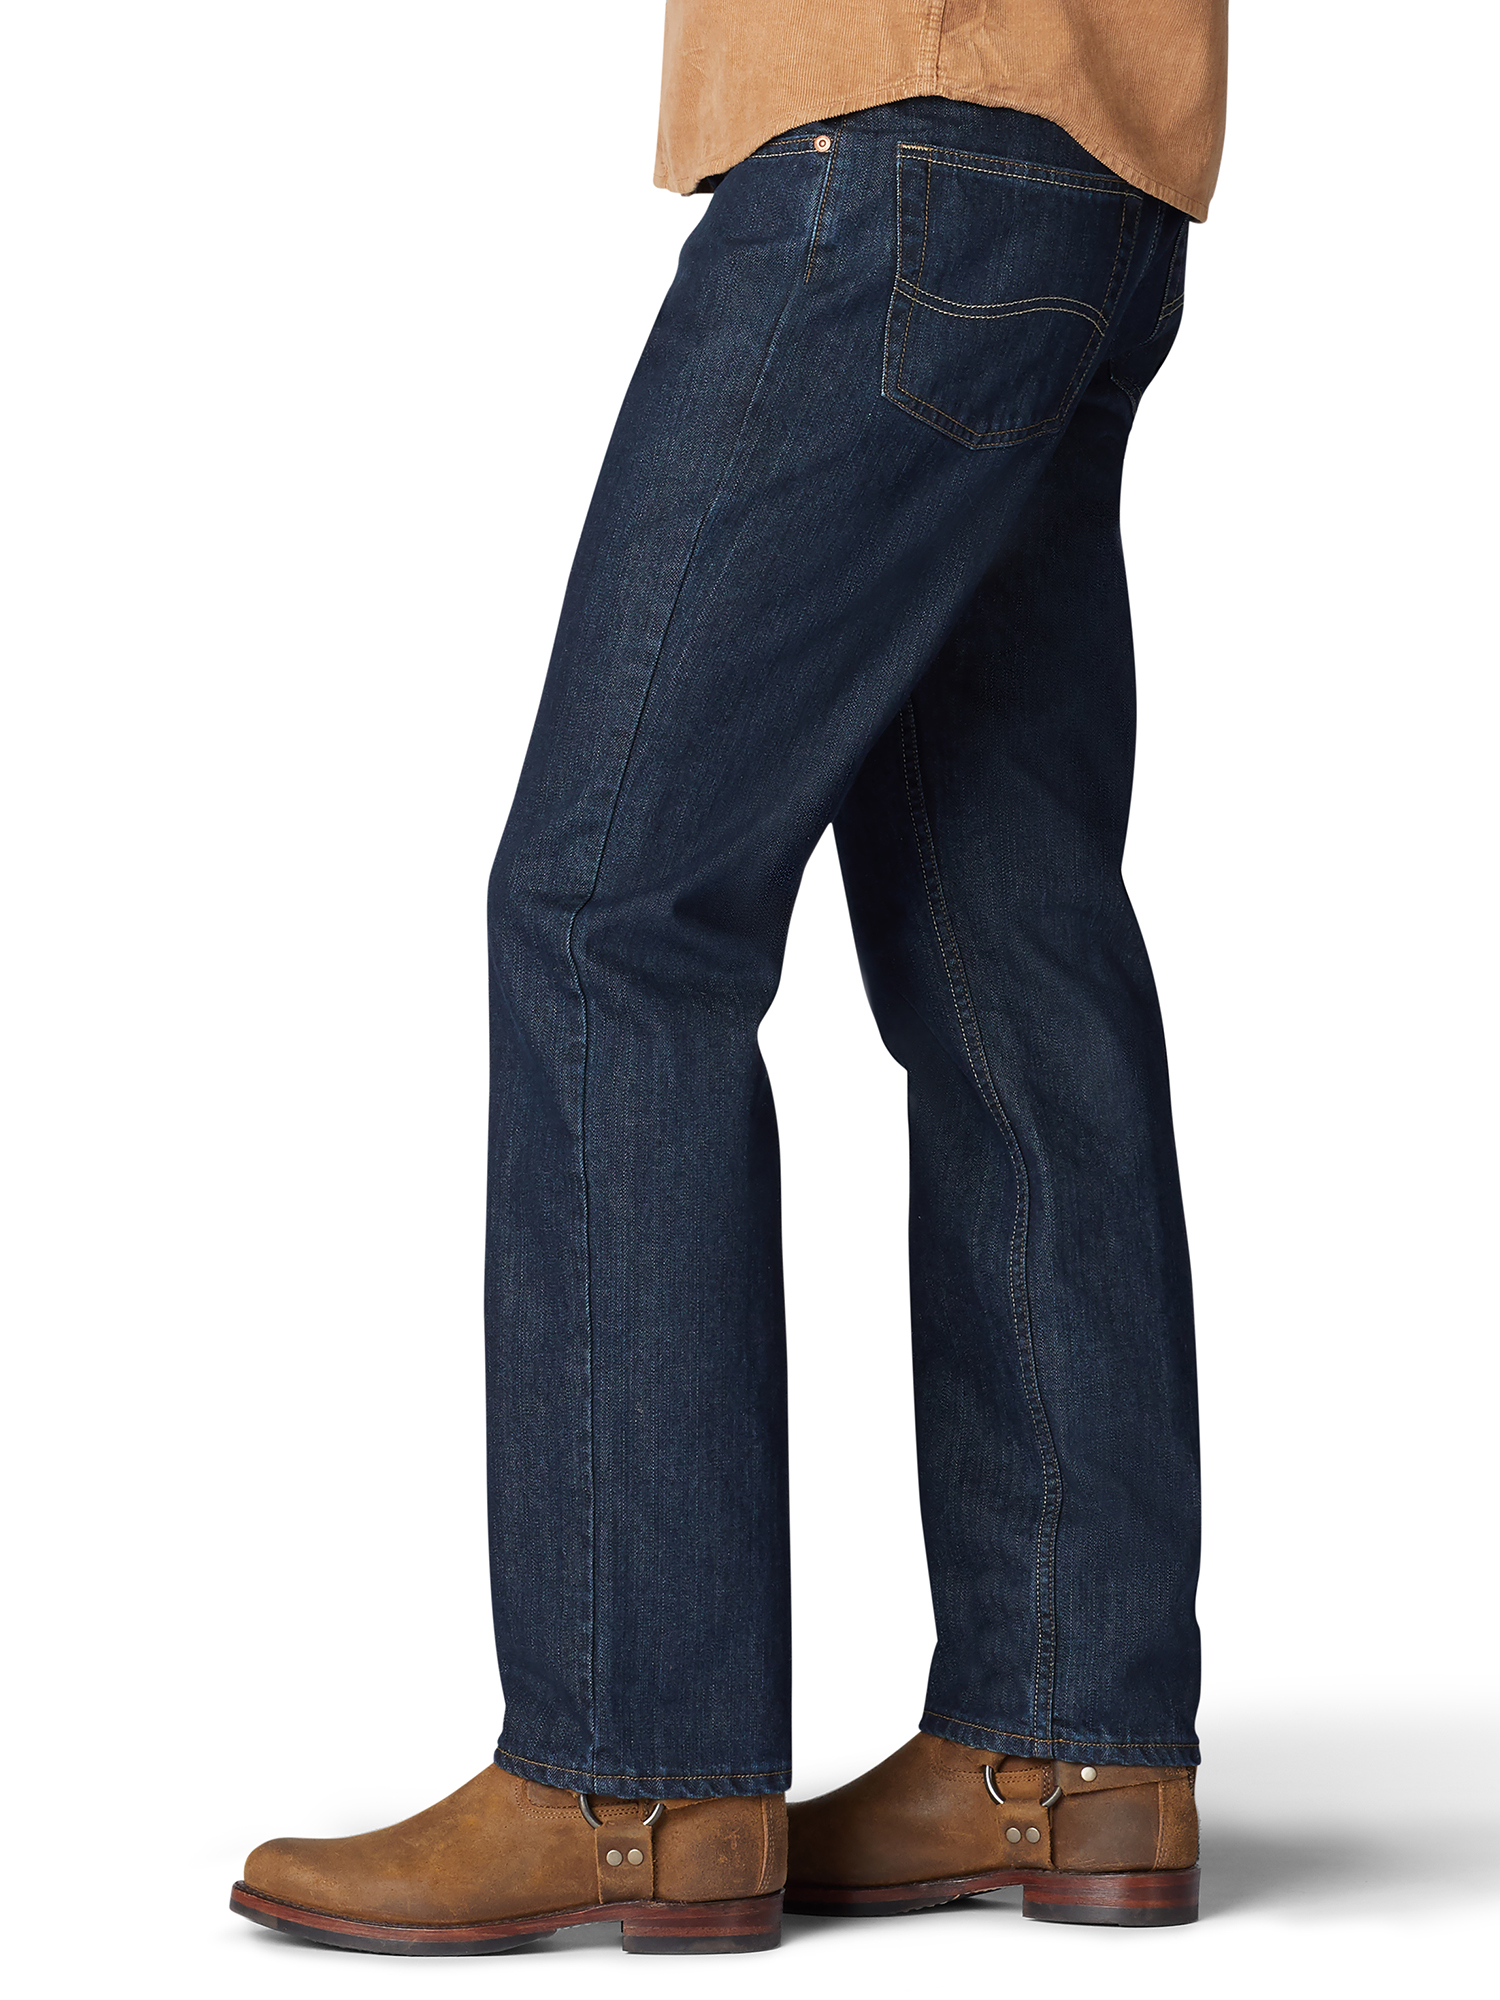 Lee Men's Relaxed Fit Straight Leg Jeans - image 2 of 3